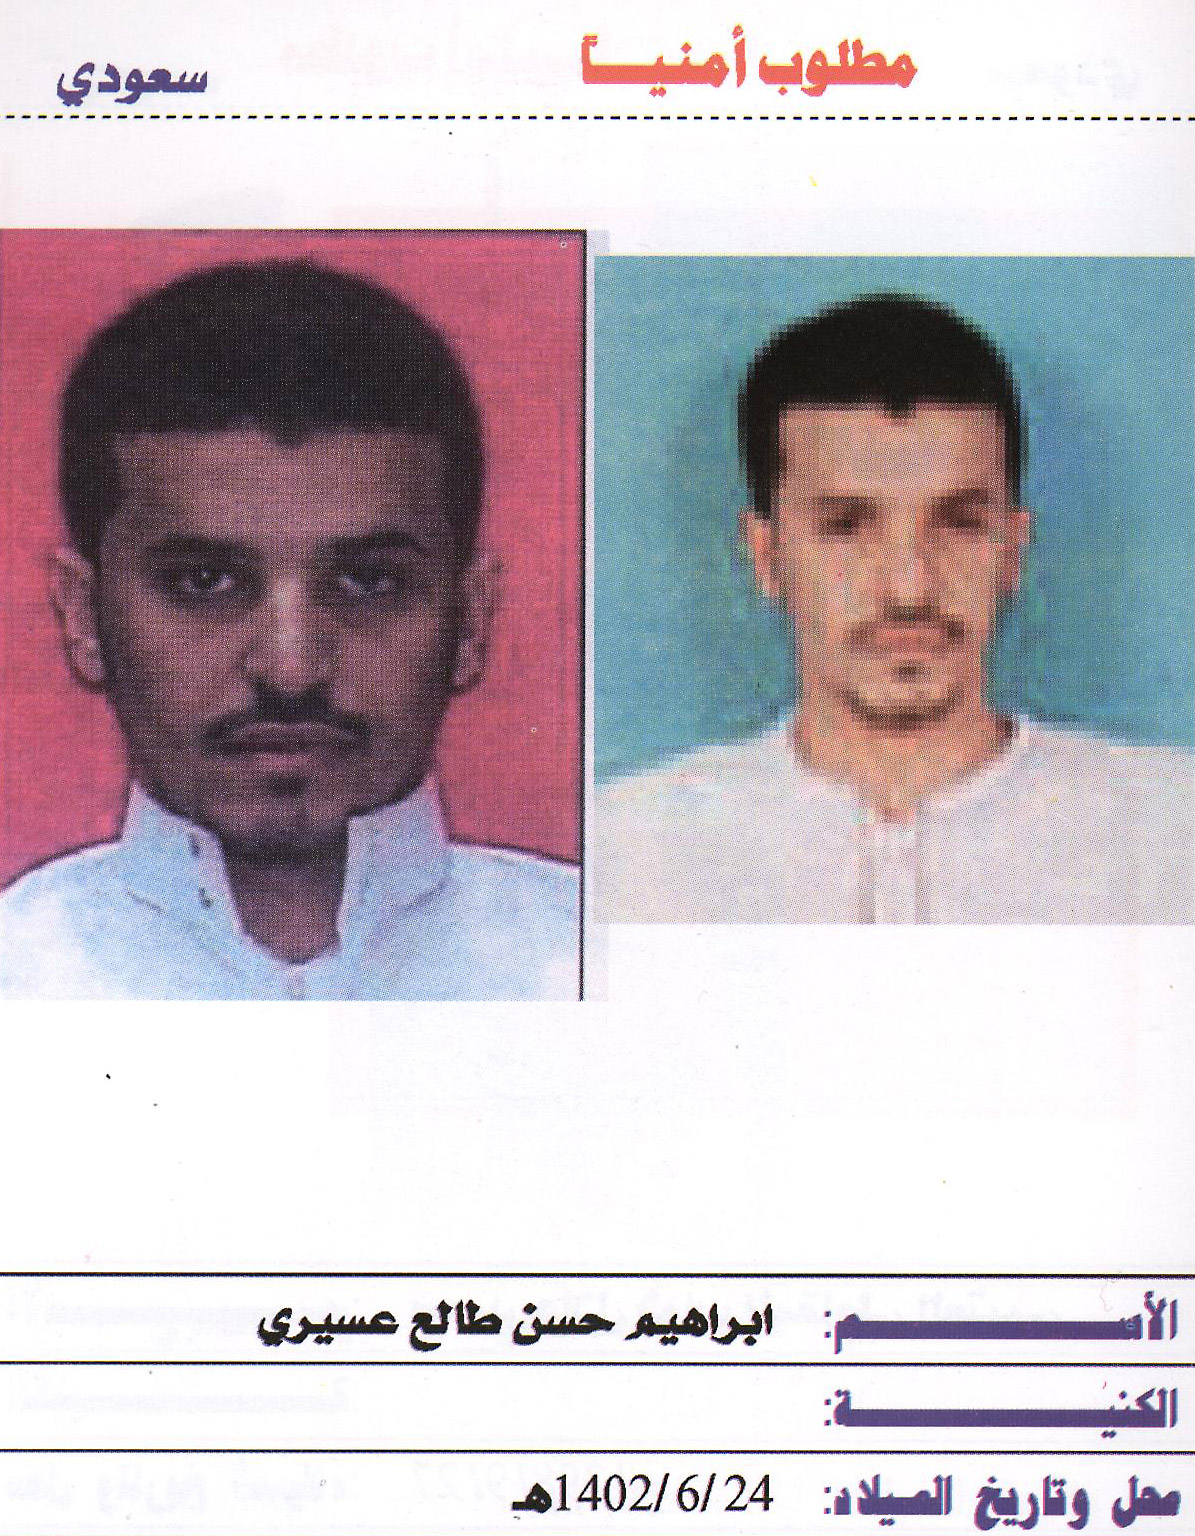 This handout photo released by the Yemeni Interior Ministry in April 2009 shows suspected Yemen-based Saudi al-Qaeda Ibrahim Hassan al-Asiri. The White House announced Thursday that he was killed two years ago in a United States operation in Yemen. (YEMENI INTERIOR MINISTRY/AFP/Getty Images)